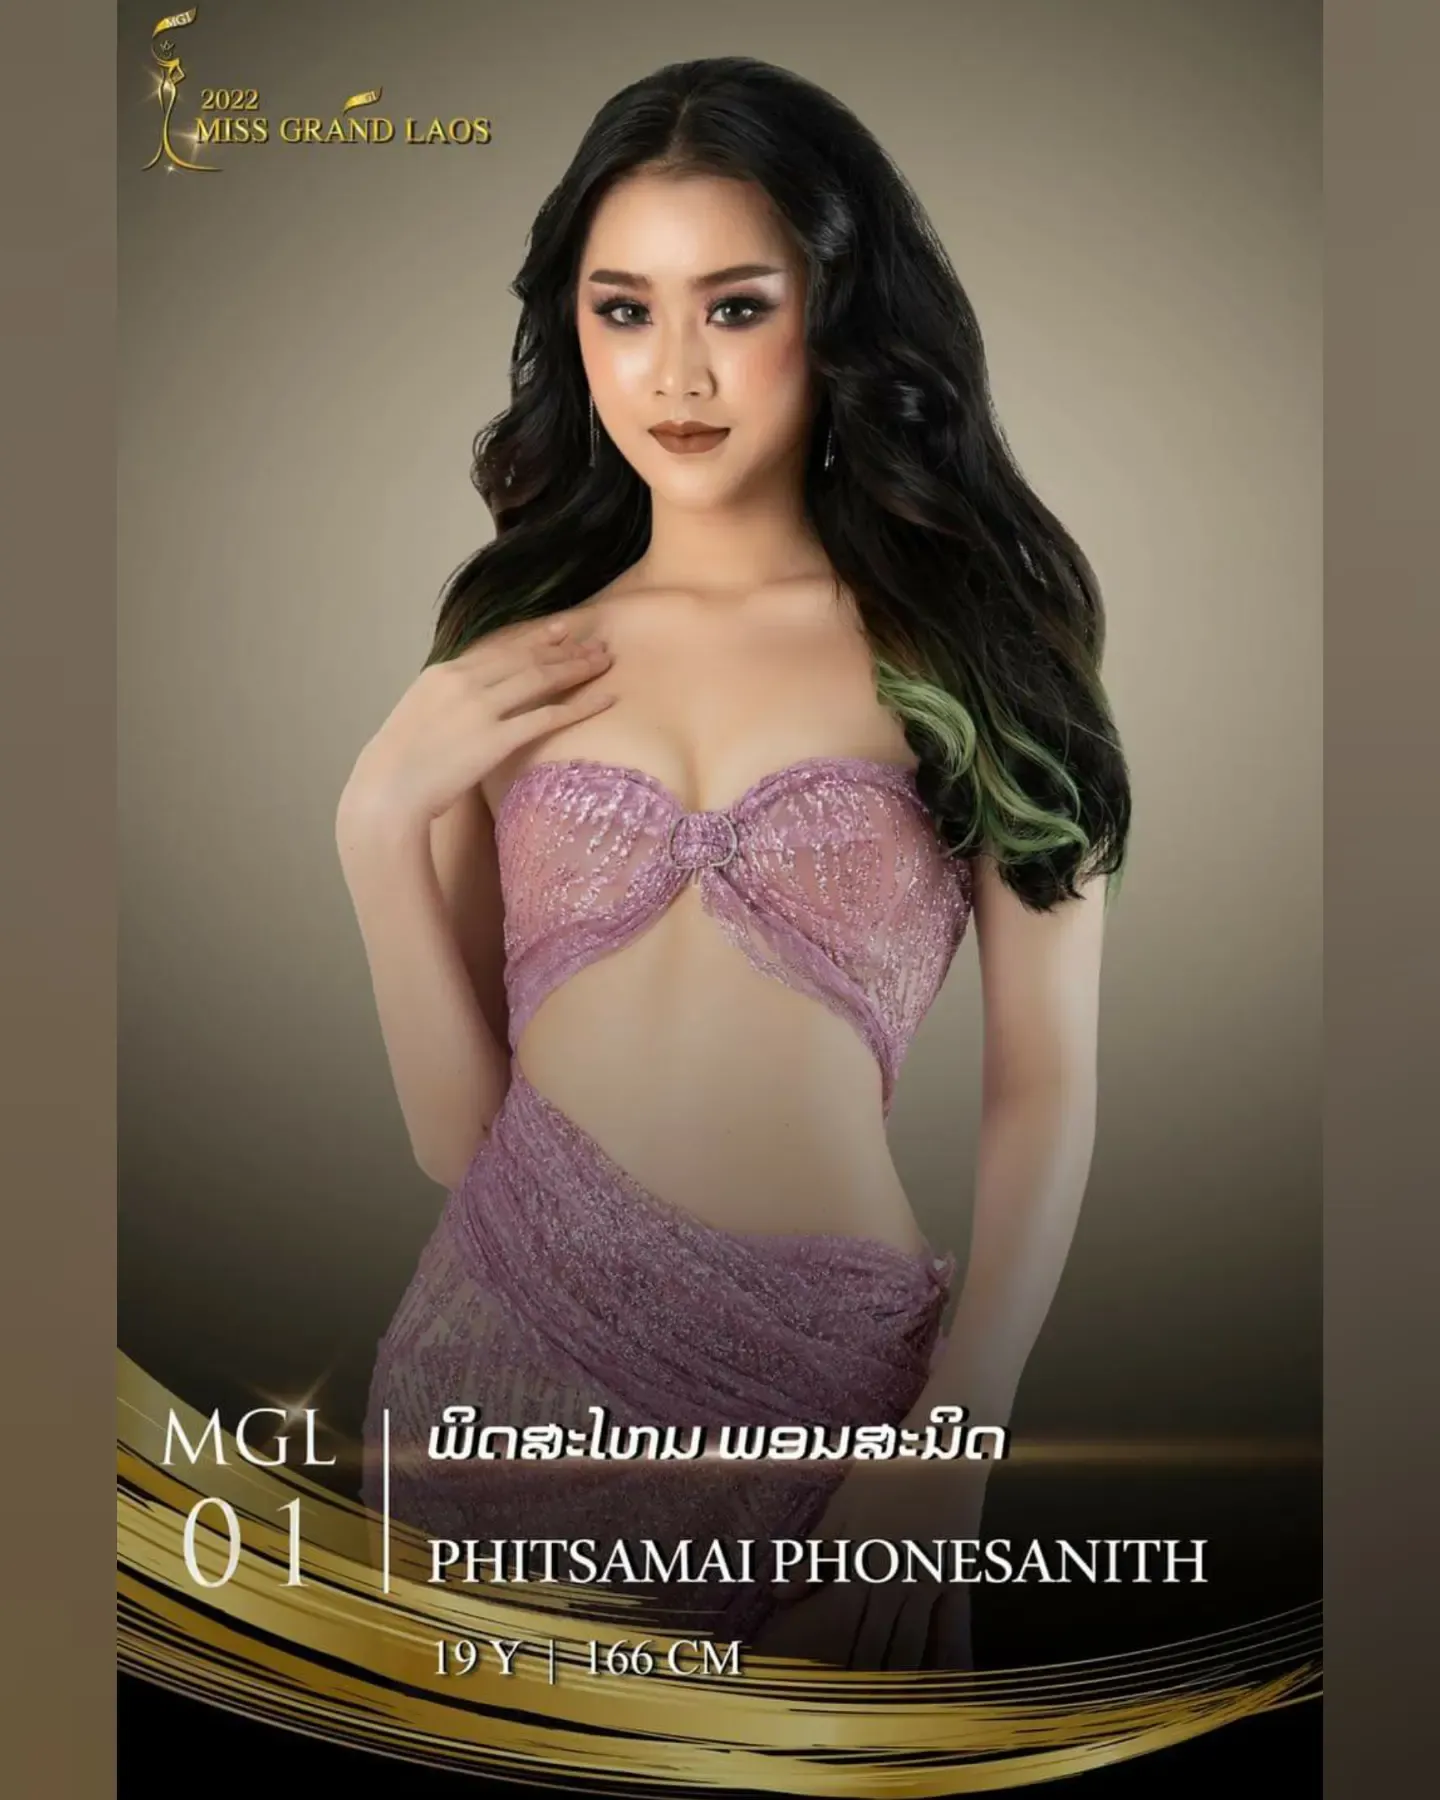 candidatas a miss grand laos 2022. final: 27 agosto. OFrqf1